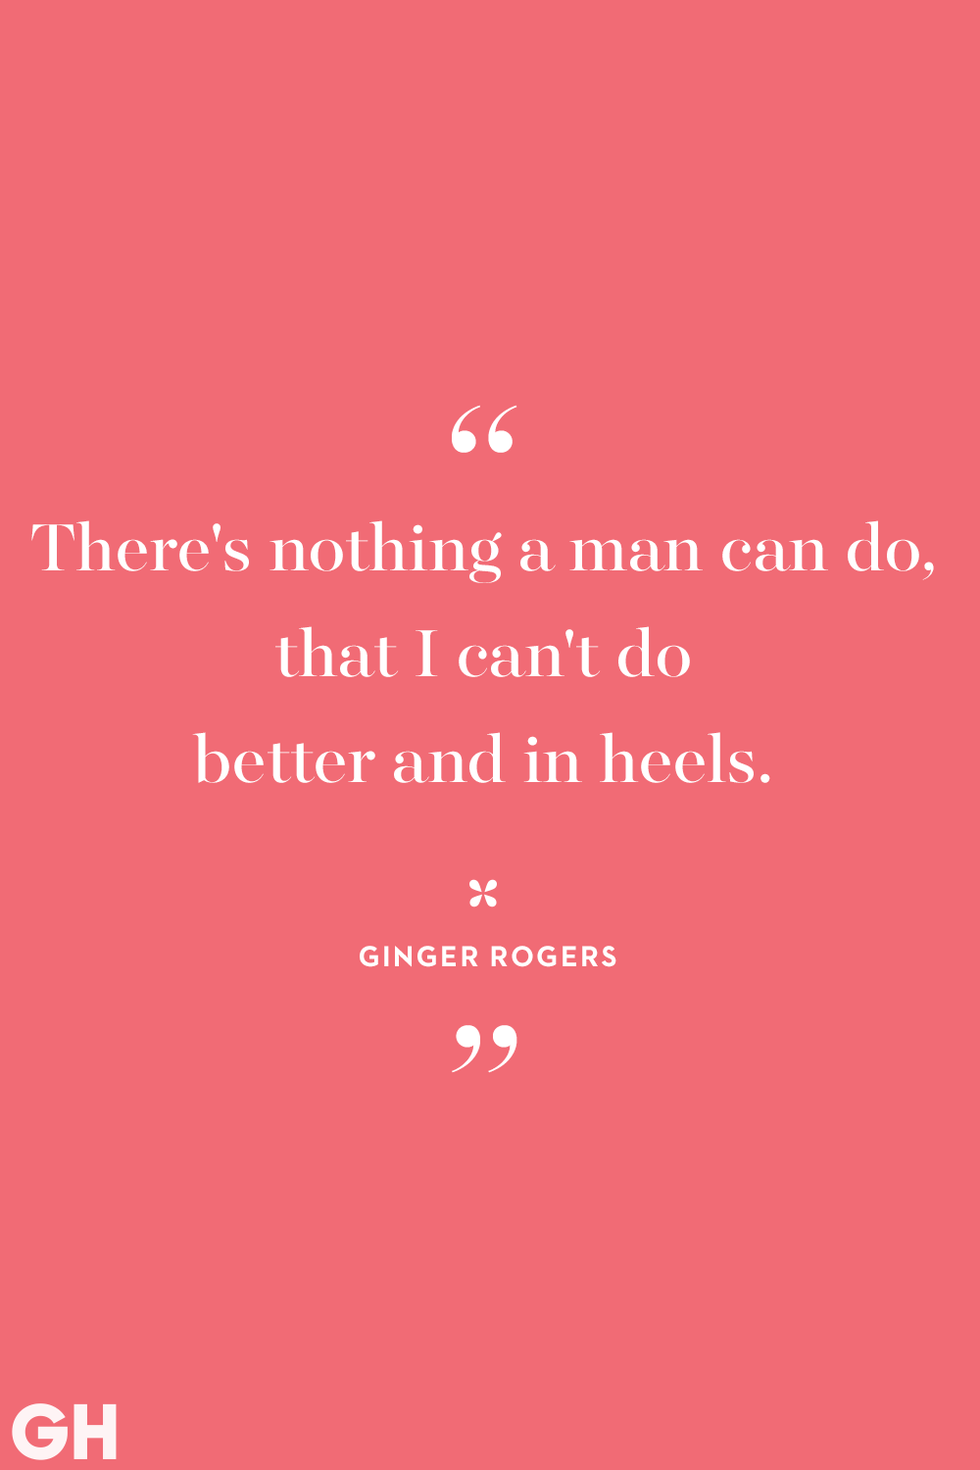 125 Best Women's Empowerment Quotes - Parade